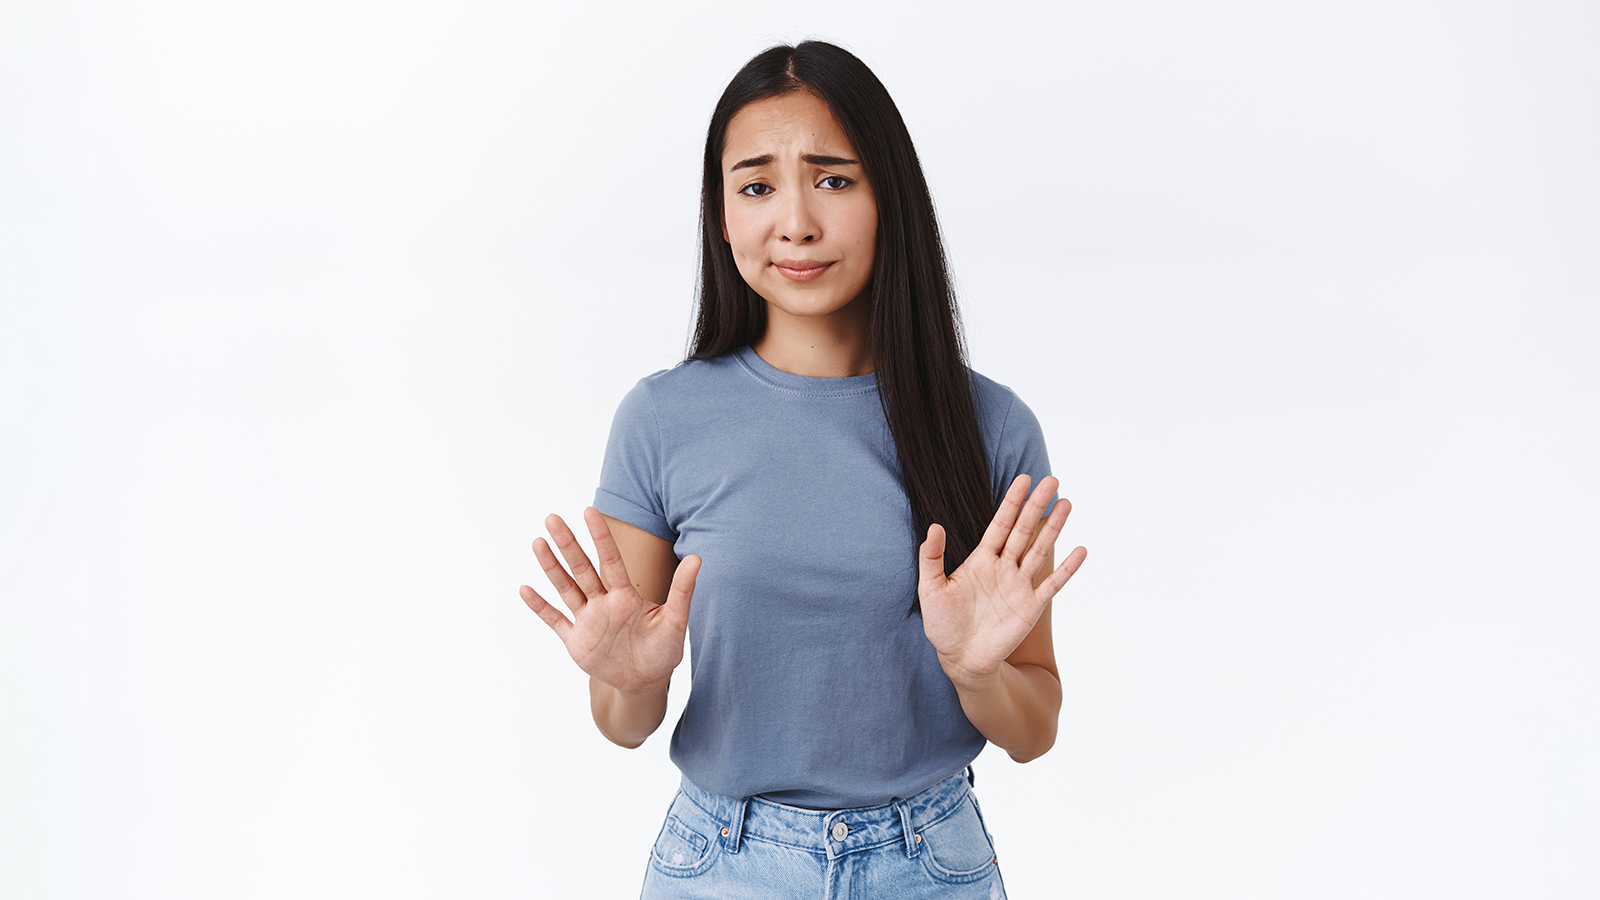 Skeptical, arrogant and unamused asian woman, raising arms in stop, refusal motion, smirk and frowning judgemental dislike offer, uninterested in product, standing white background